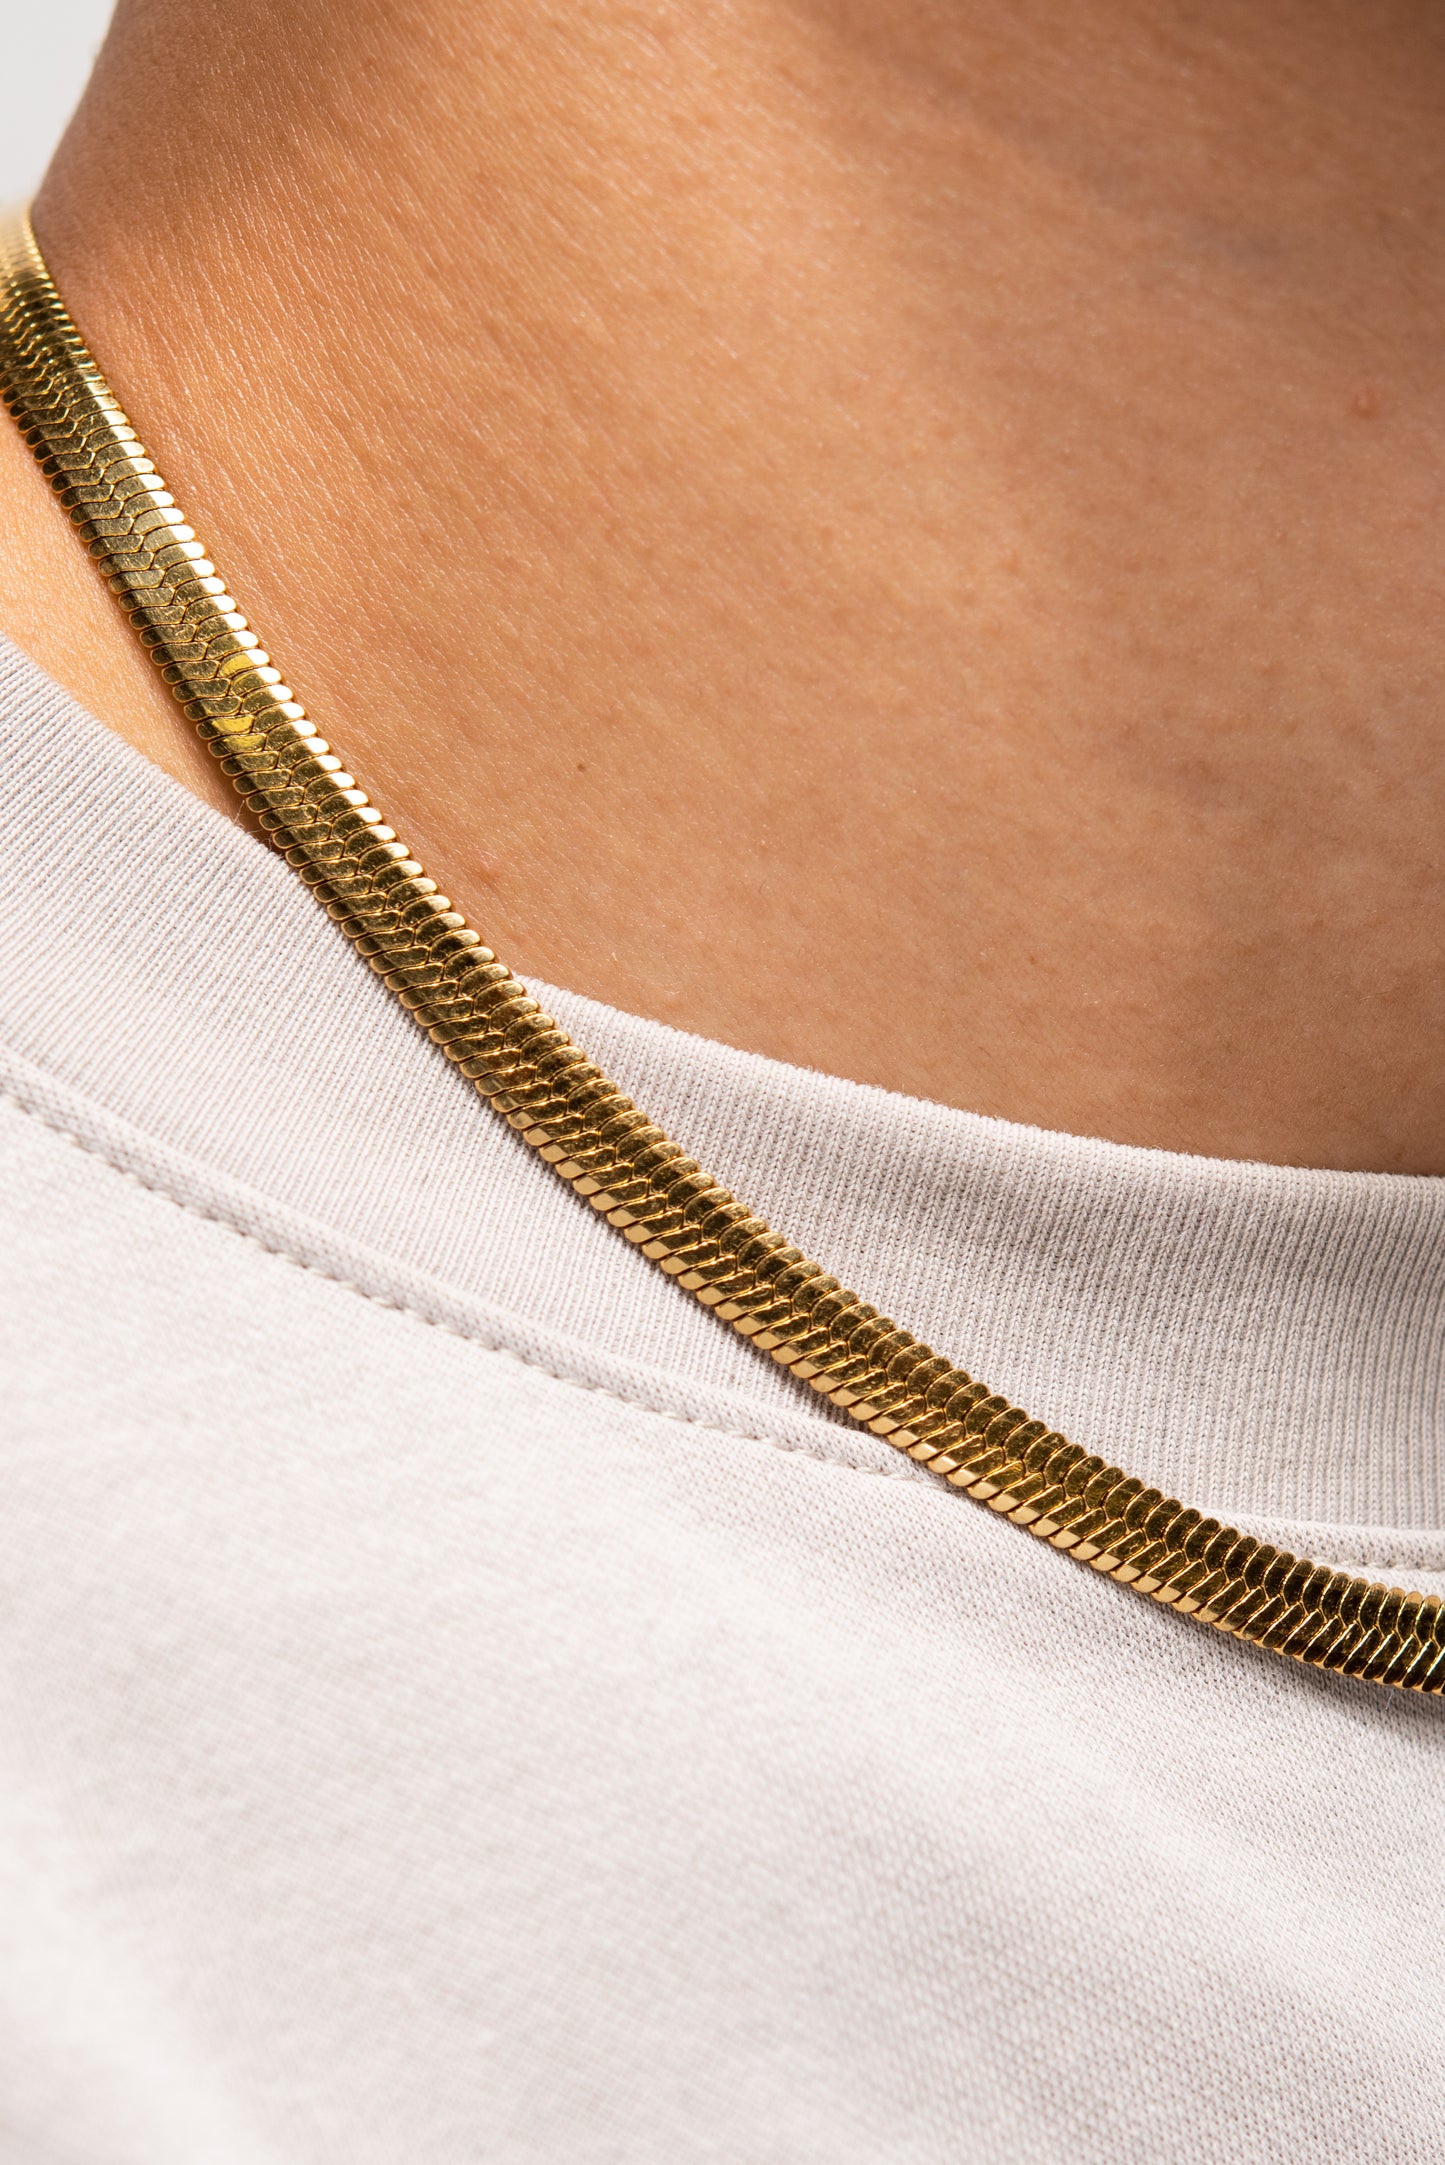 Stainless Steel Herringbone Chain Necklace - Gold